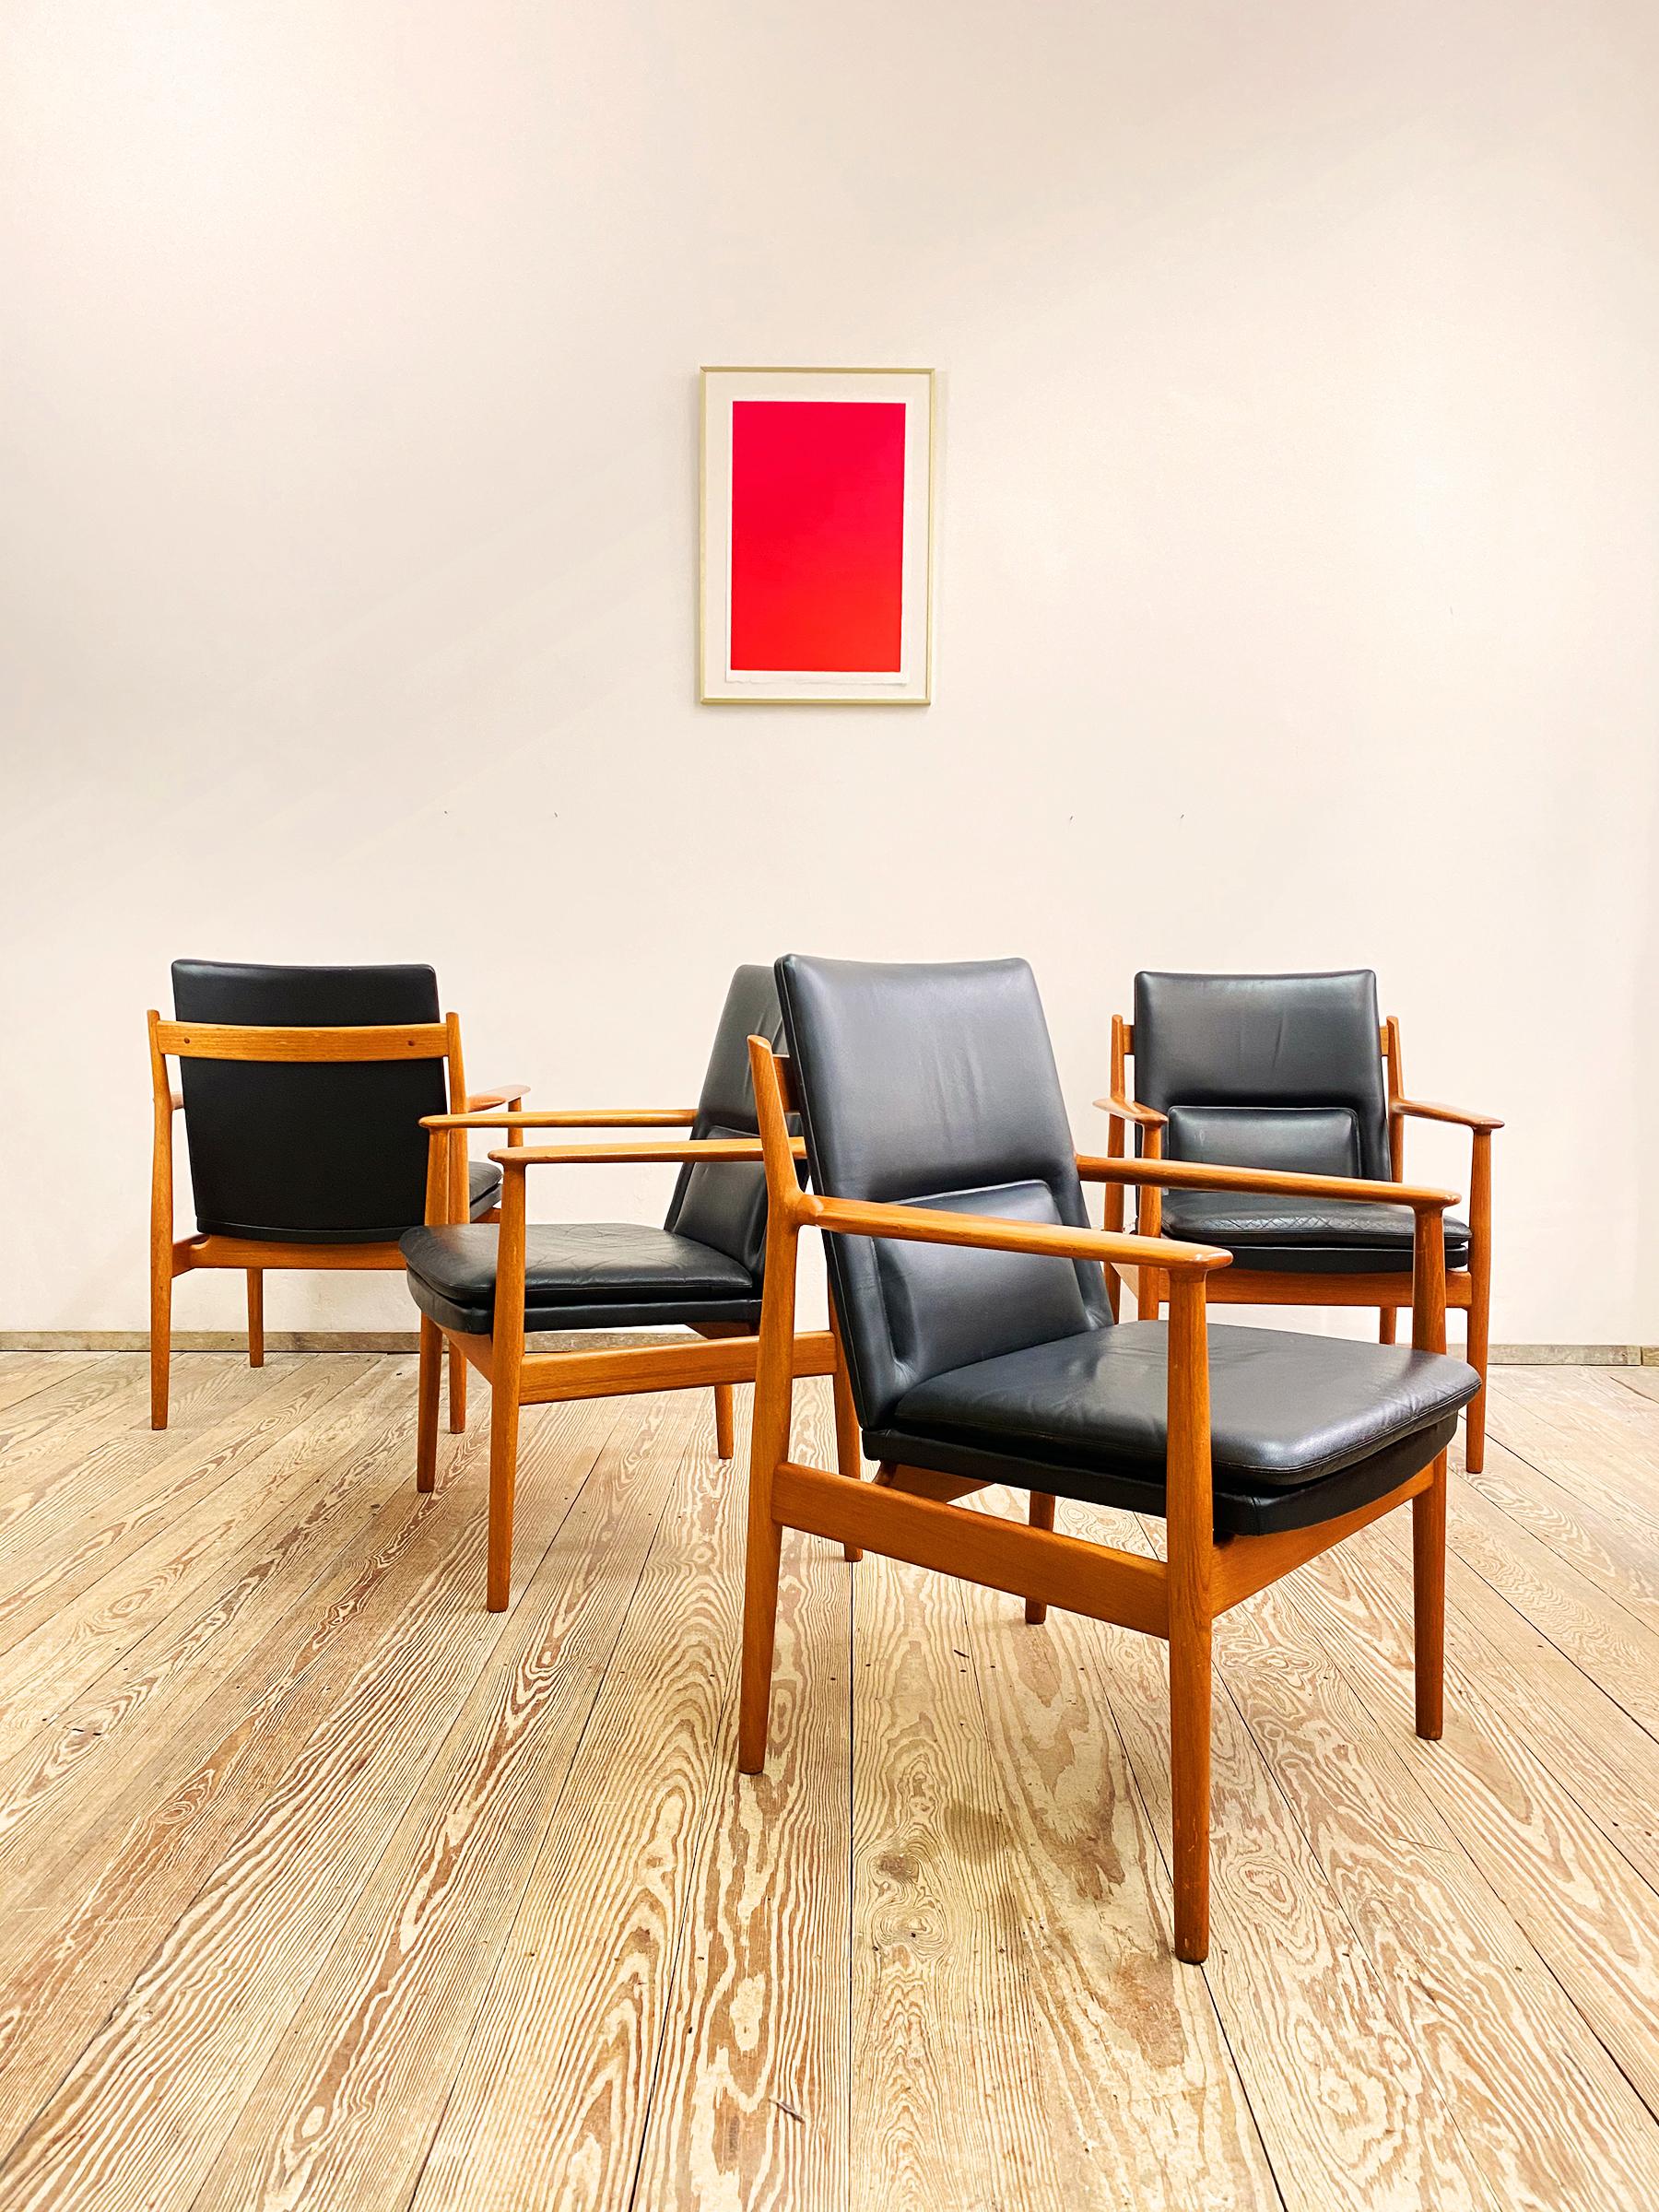 This beautiful set of vintage high end dining chairs designed by danish Designer Arne Vodder was manufactured by Sibast in Denmark. The set features 4 chairs of massive teak wood and leather upholstery, model 431, a dining chair with clean yet